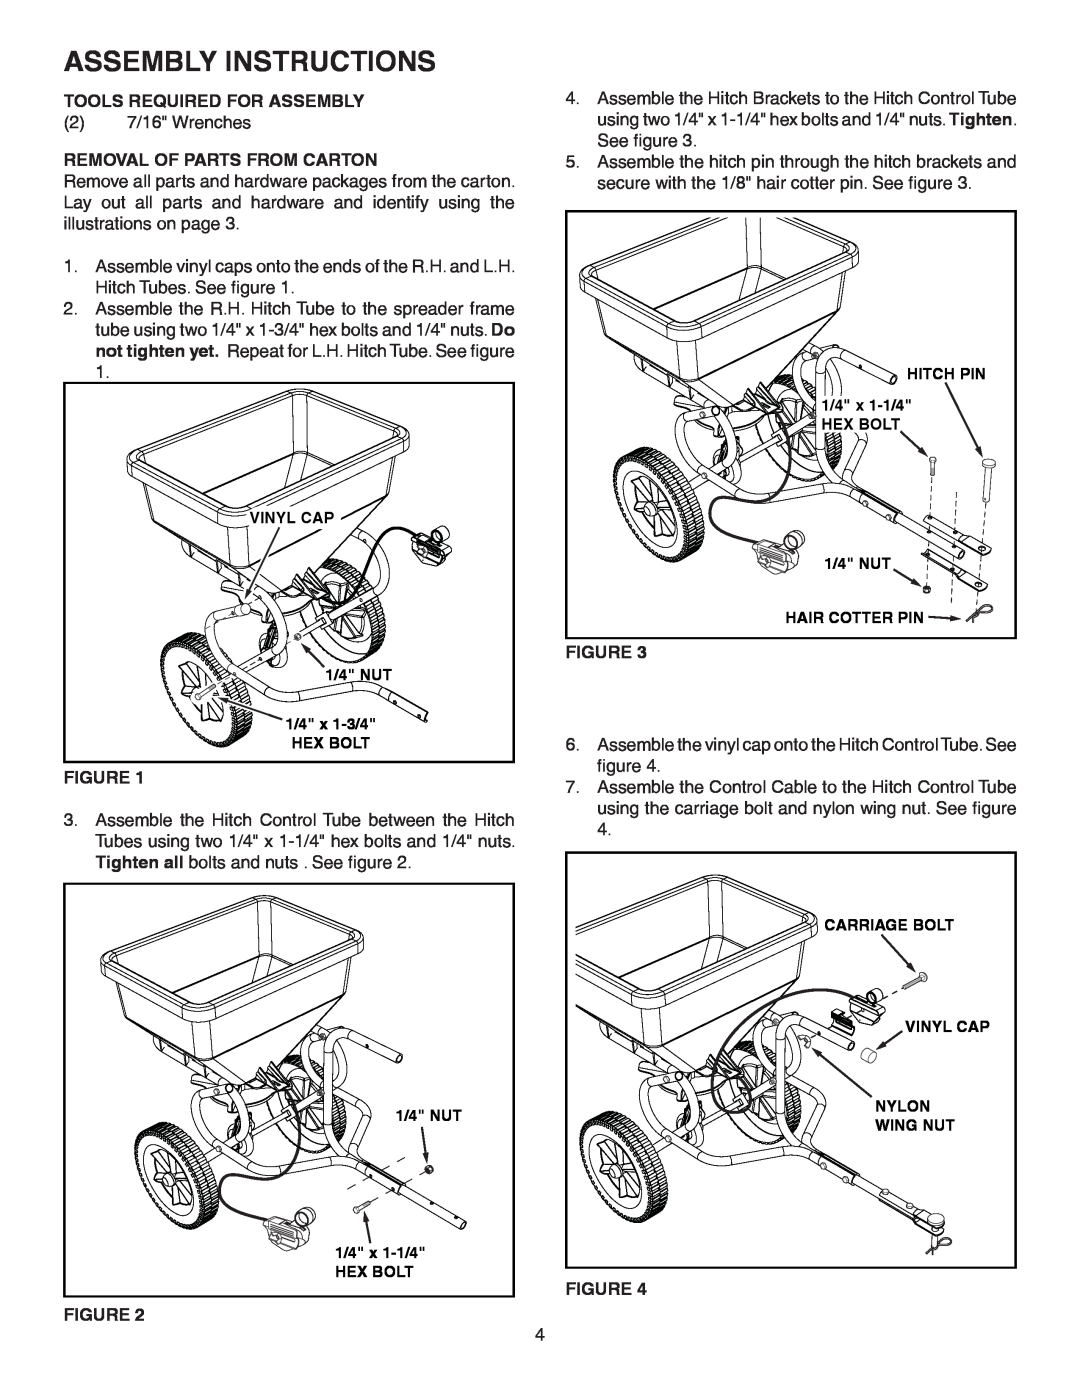 Agri-Fab 45-0410 owner manual Assembly Instructions, Tools Required For Assembly, Removal Of Parts From Carton 